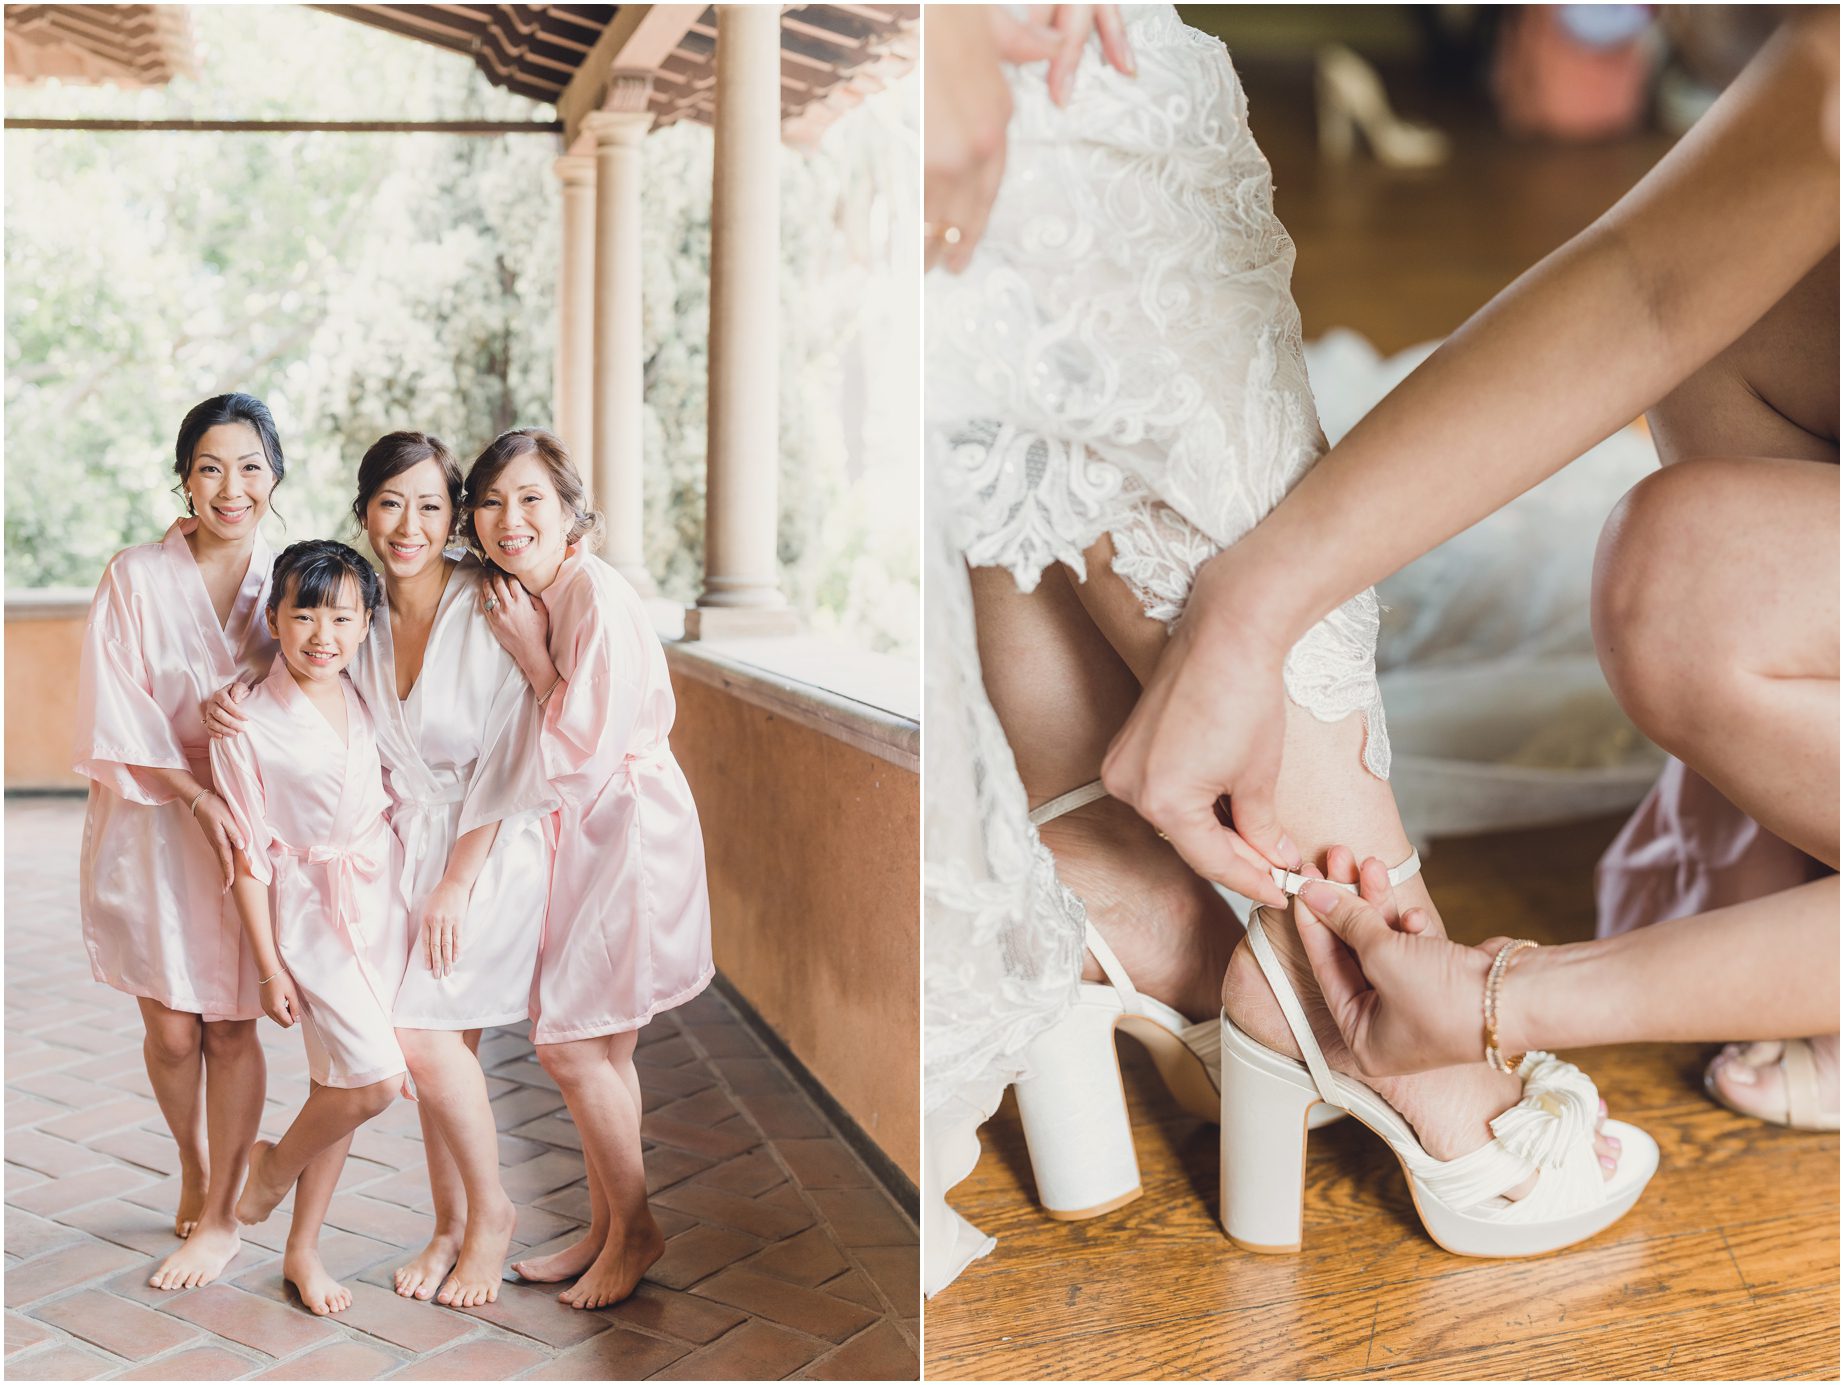 A bride poses with her bridesmaids on a balcony at villa del sol d'Oro and a bridesmaid helps the bride buckle her shoes before her wedding. Photographs by sun and sparrow